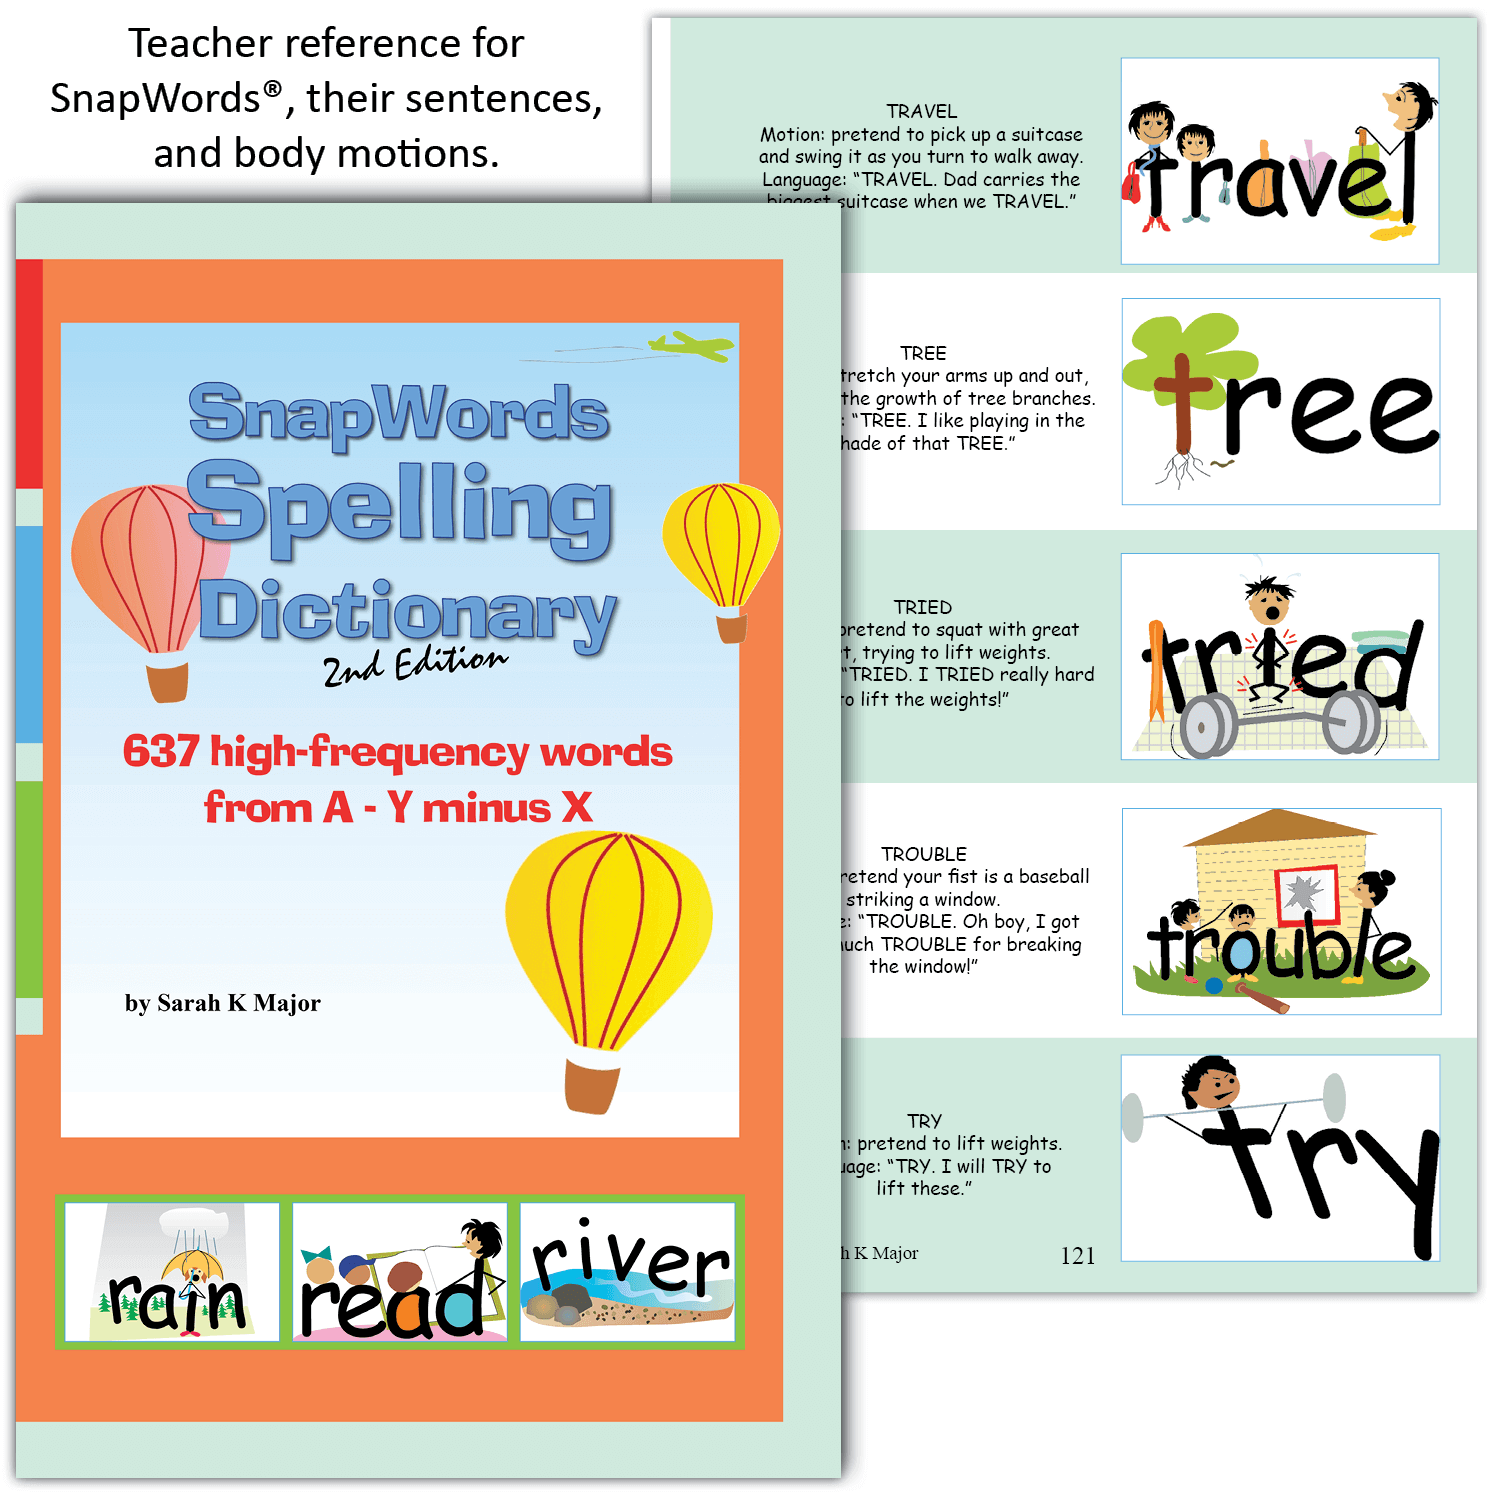 SnapWords Spelling Dictionary, 2nd Edition